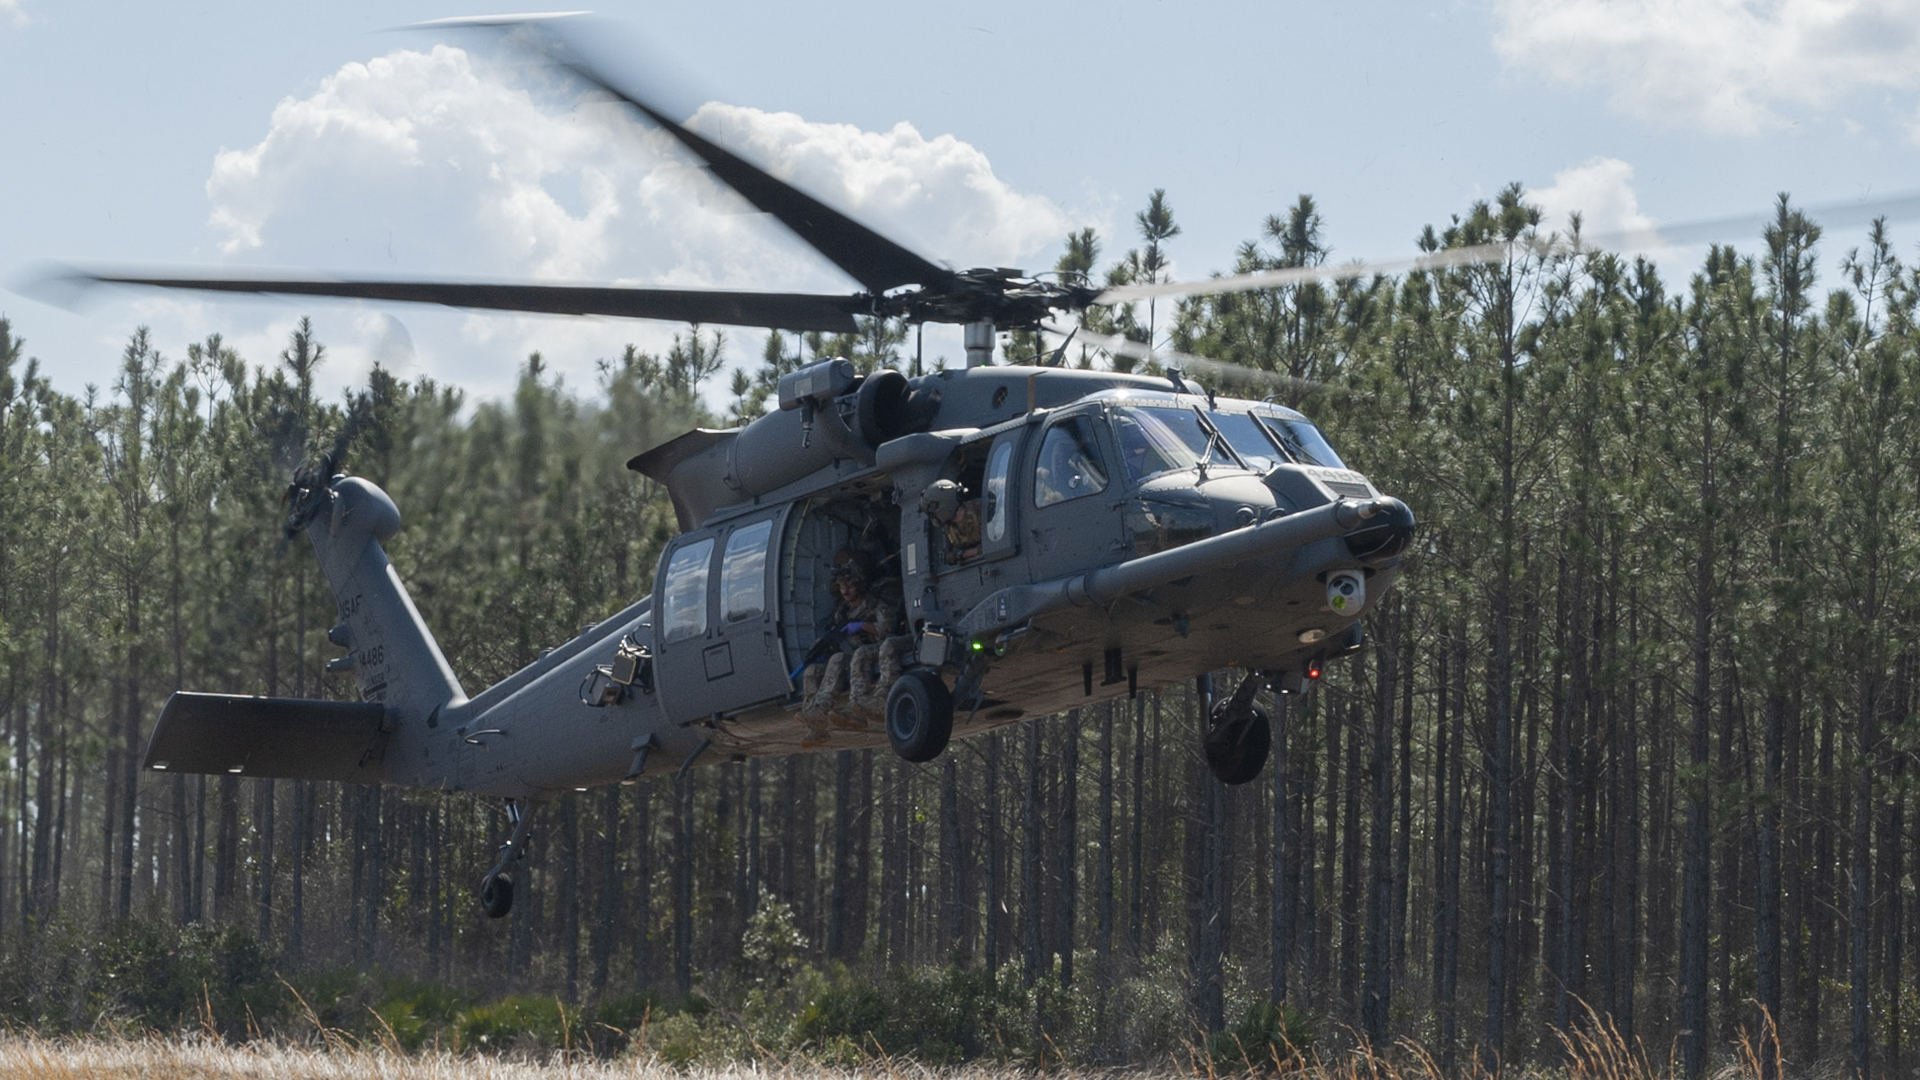 Air Force crew performs first-ever rescue in brand new search-and-rescue helicopter